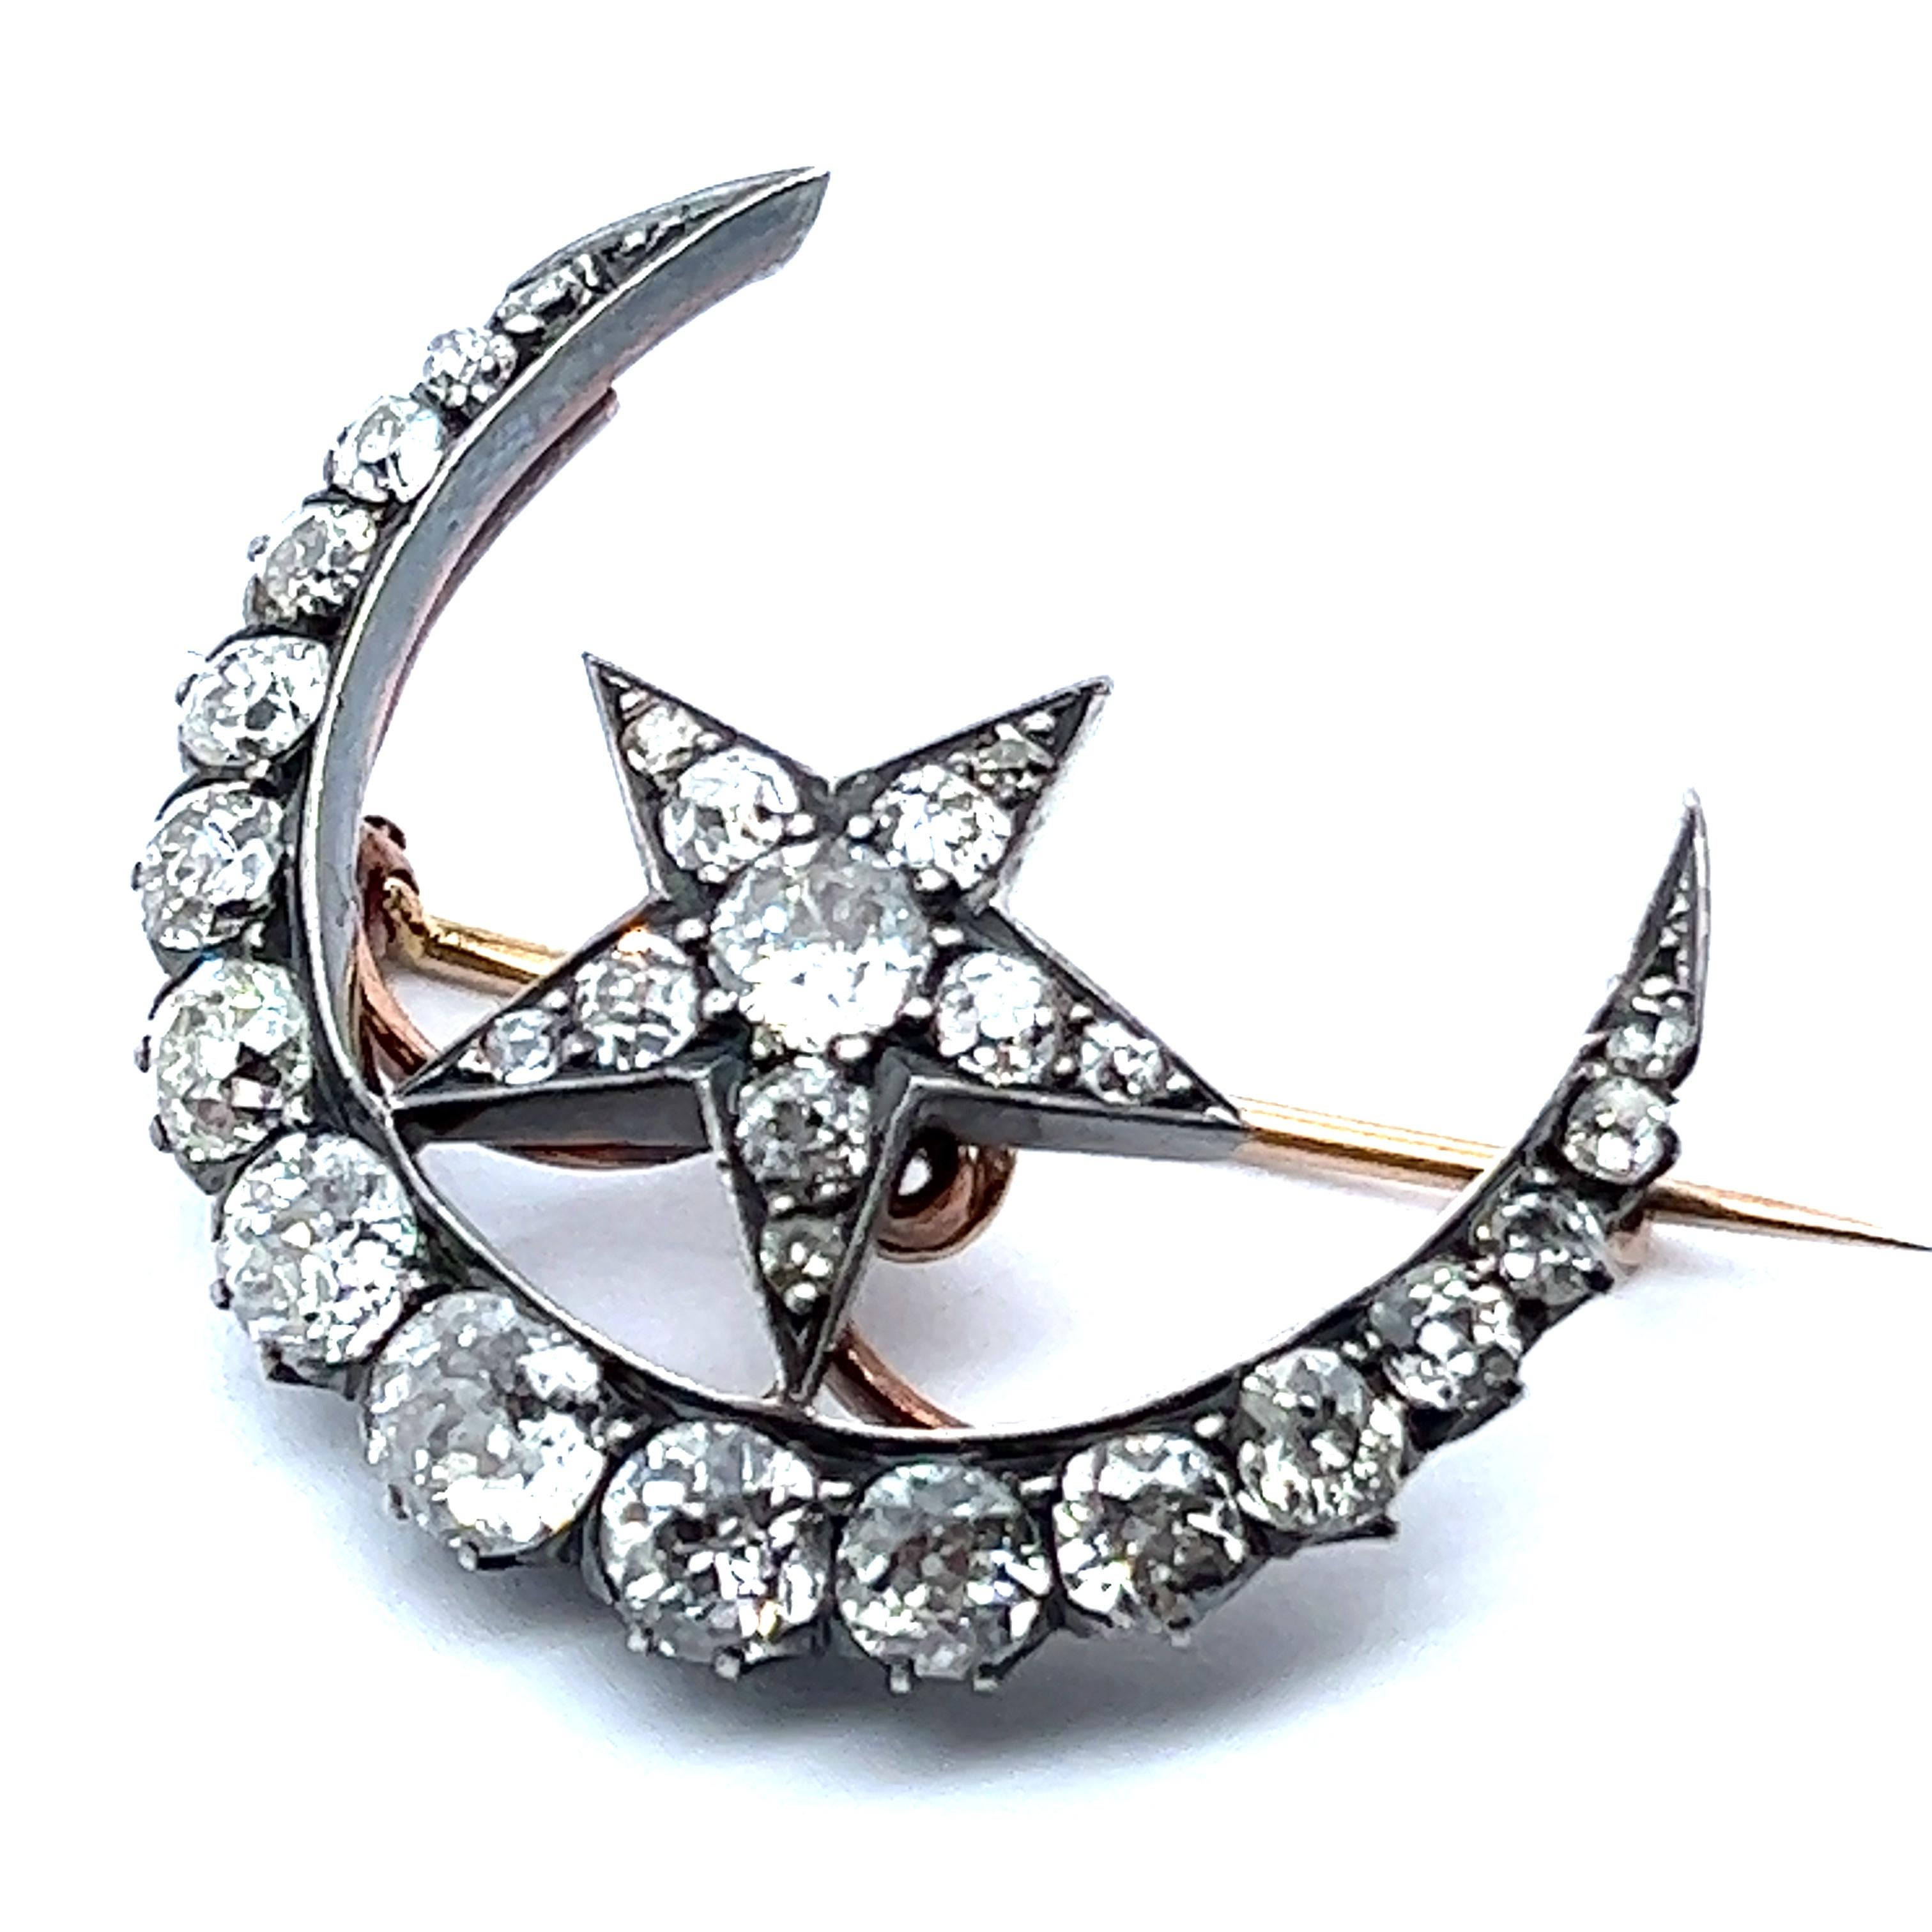 Introducing an exquisite crescent moon and star brooch adorned with an exceptional old cut diamond. This is a wonderful creation from the late 19th century, a time when these brooches were at the height of their popularity. Embodying the essence of